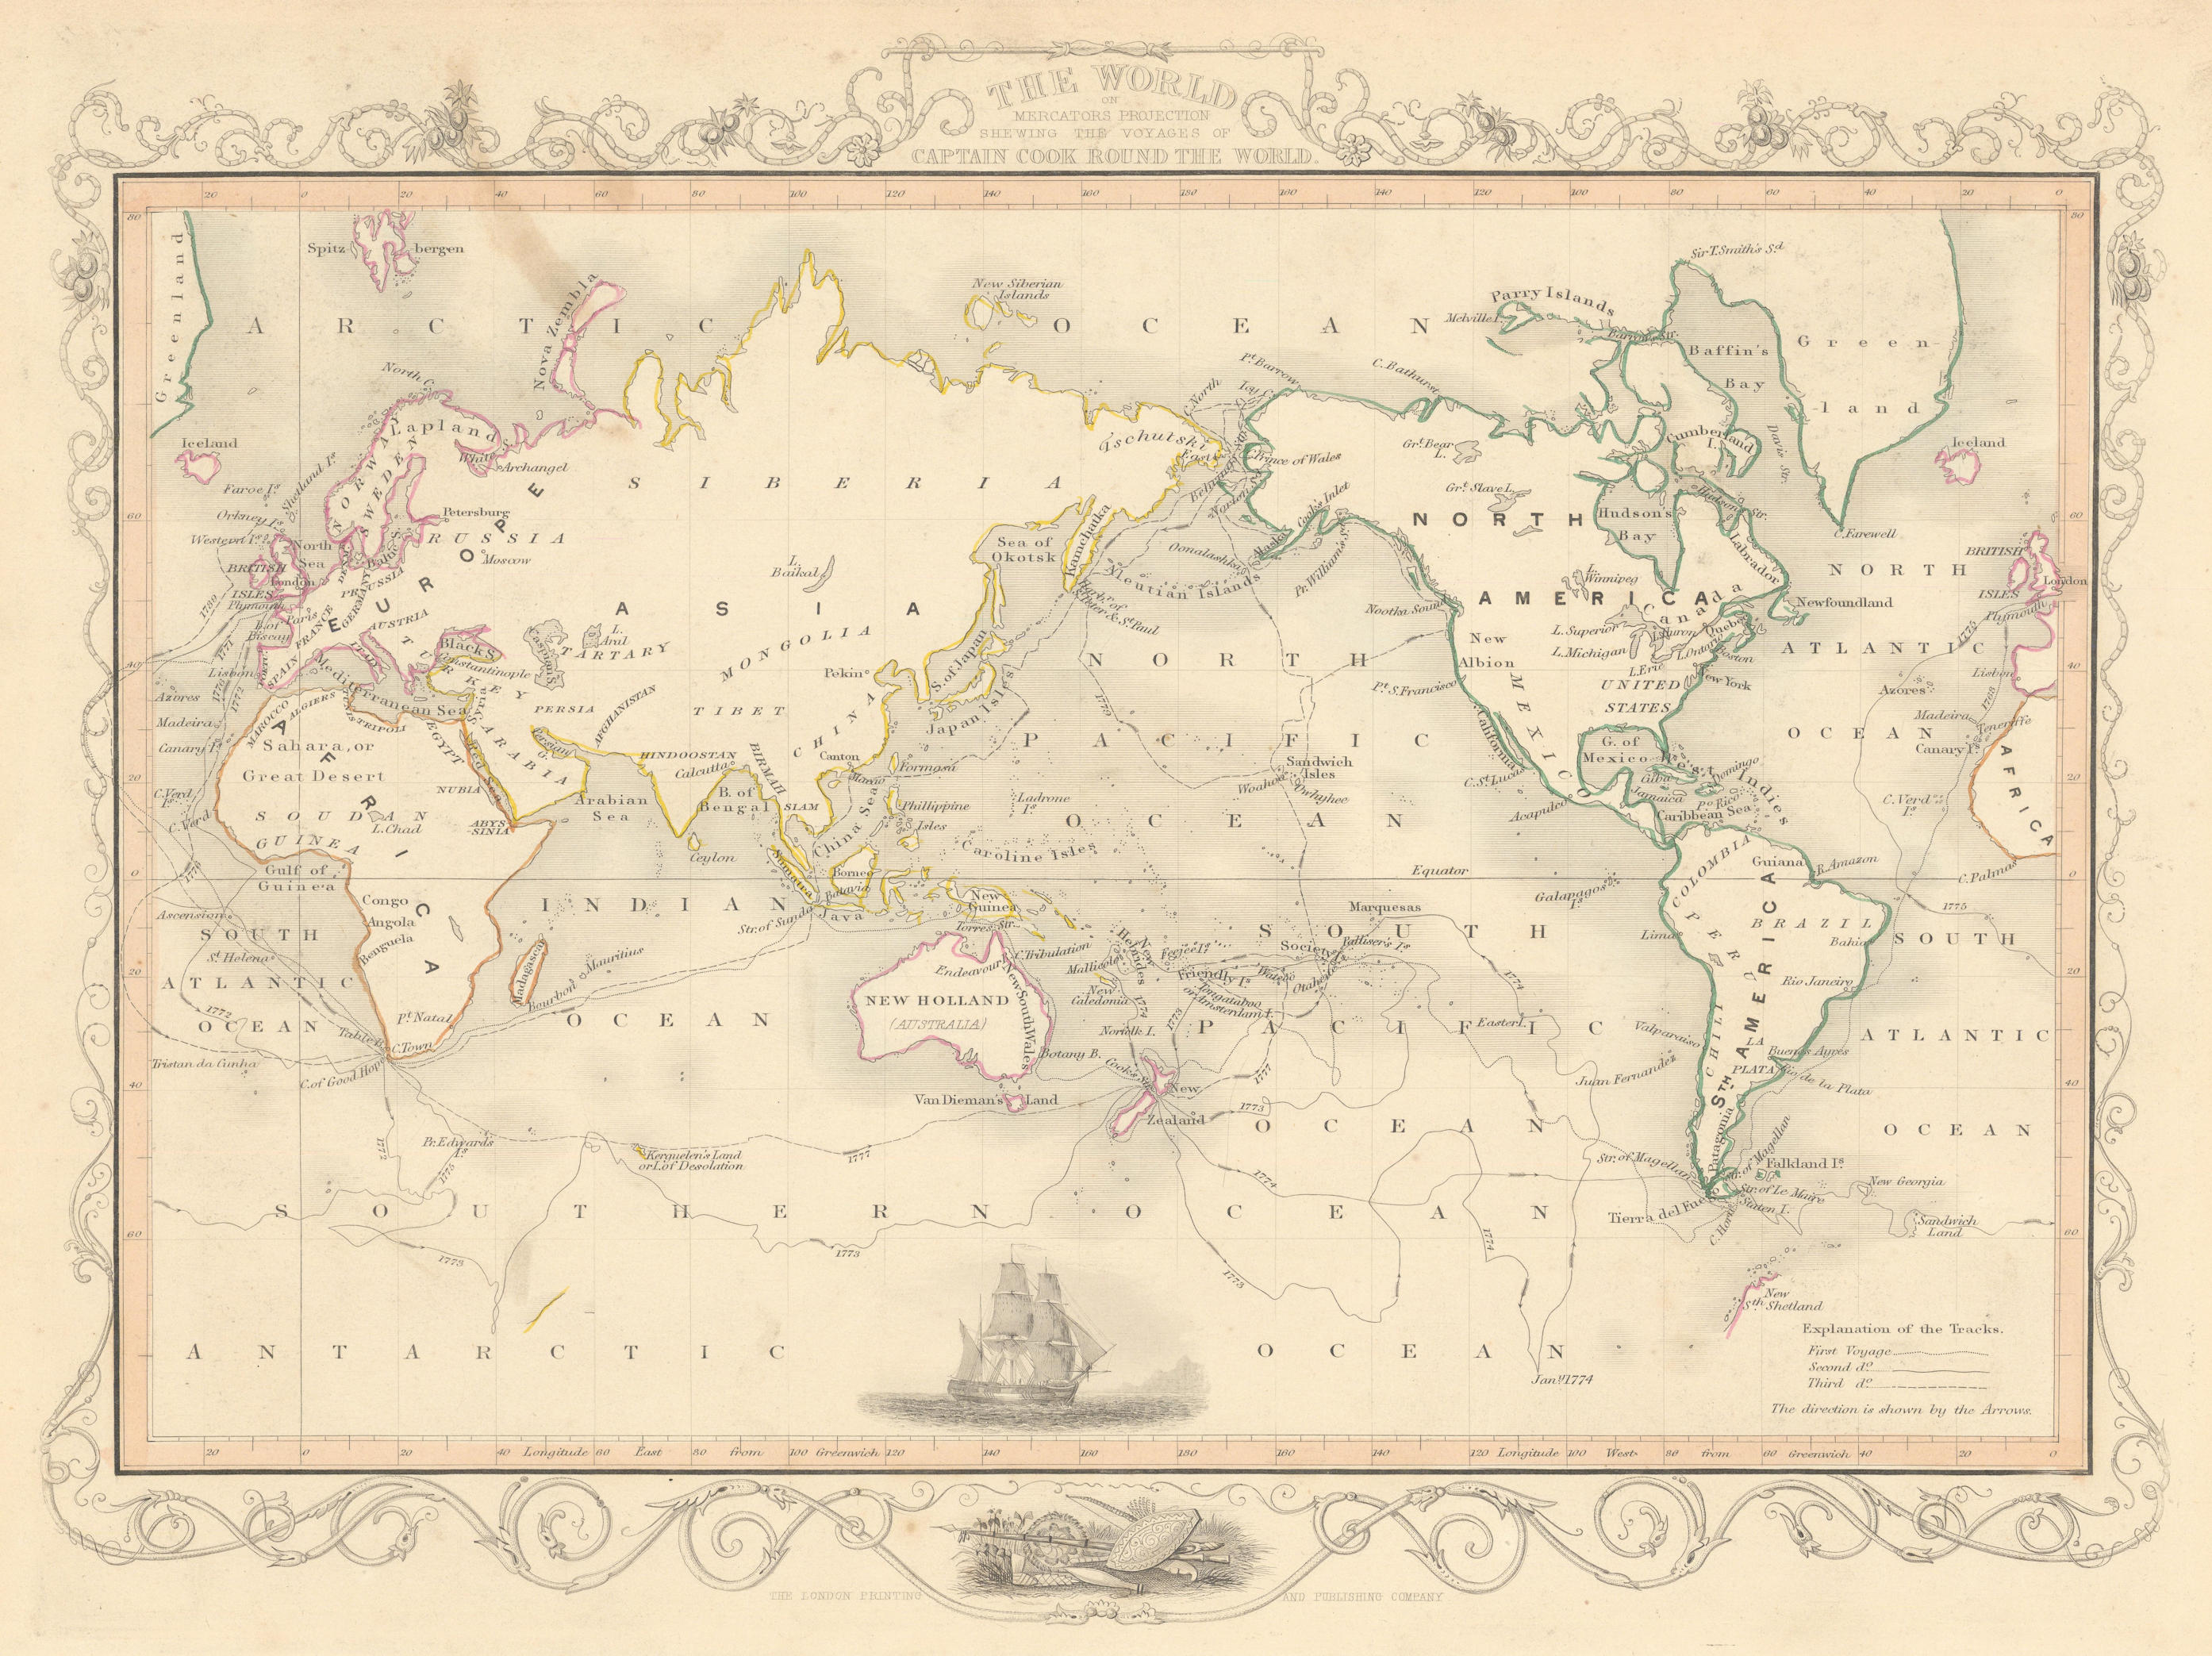 Associate Product THE WORLD. 'Shewing the voyages of Captain Cook'. TALLIS/RAPKIN 1851 old map